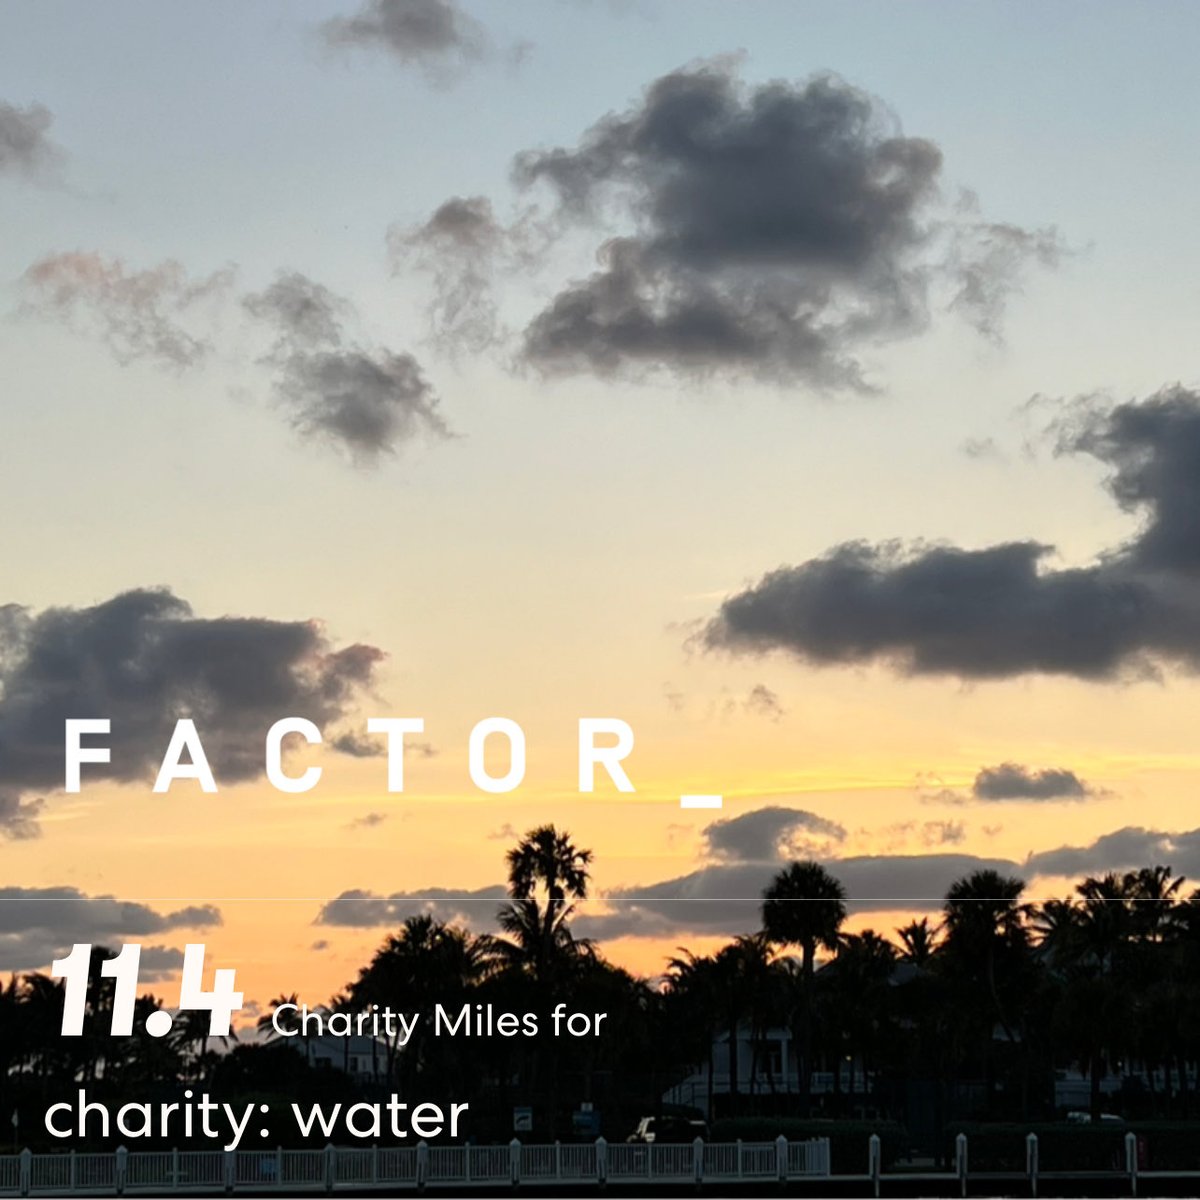 11.4 ⁦@CharityMiles⁩ Miles for ⁦@charitywater⁩ : water. Thanks to everyone who has sponsored me! 
miles.app.link/e/vaFsek8yTIb